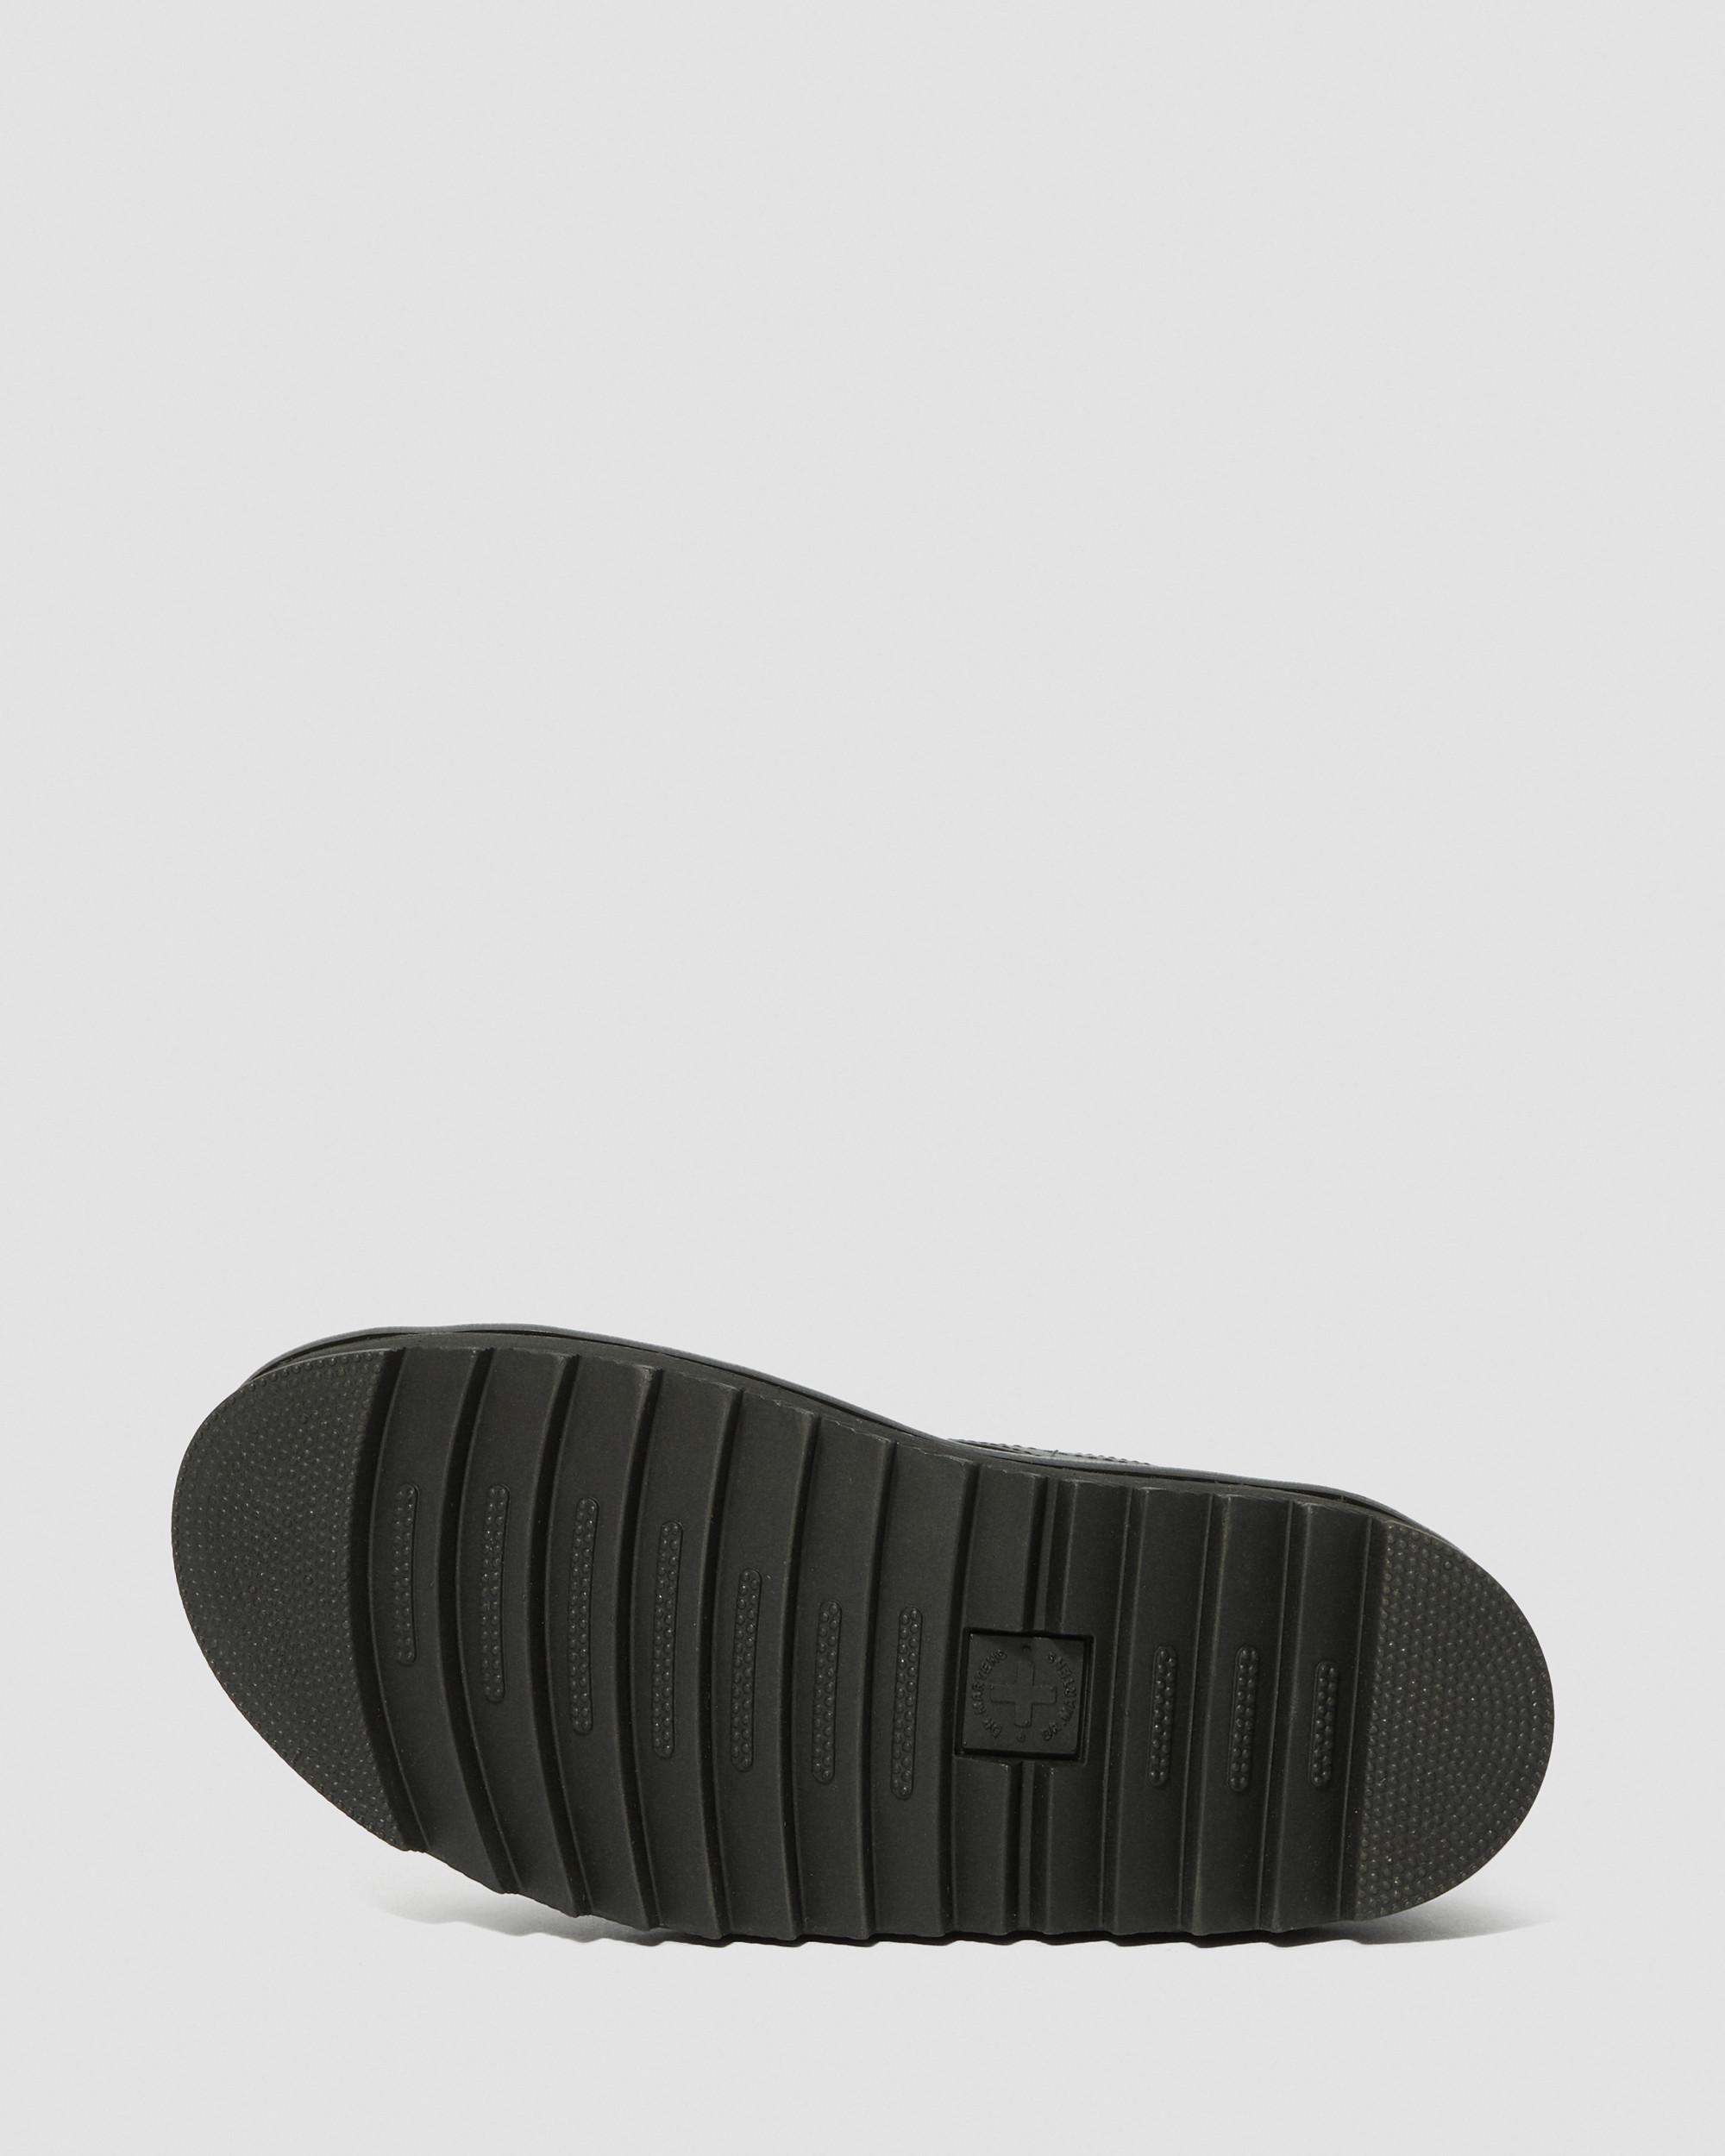 Voss Hydro Leather Strap Sandals in Black